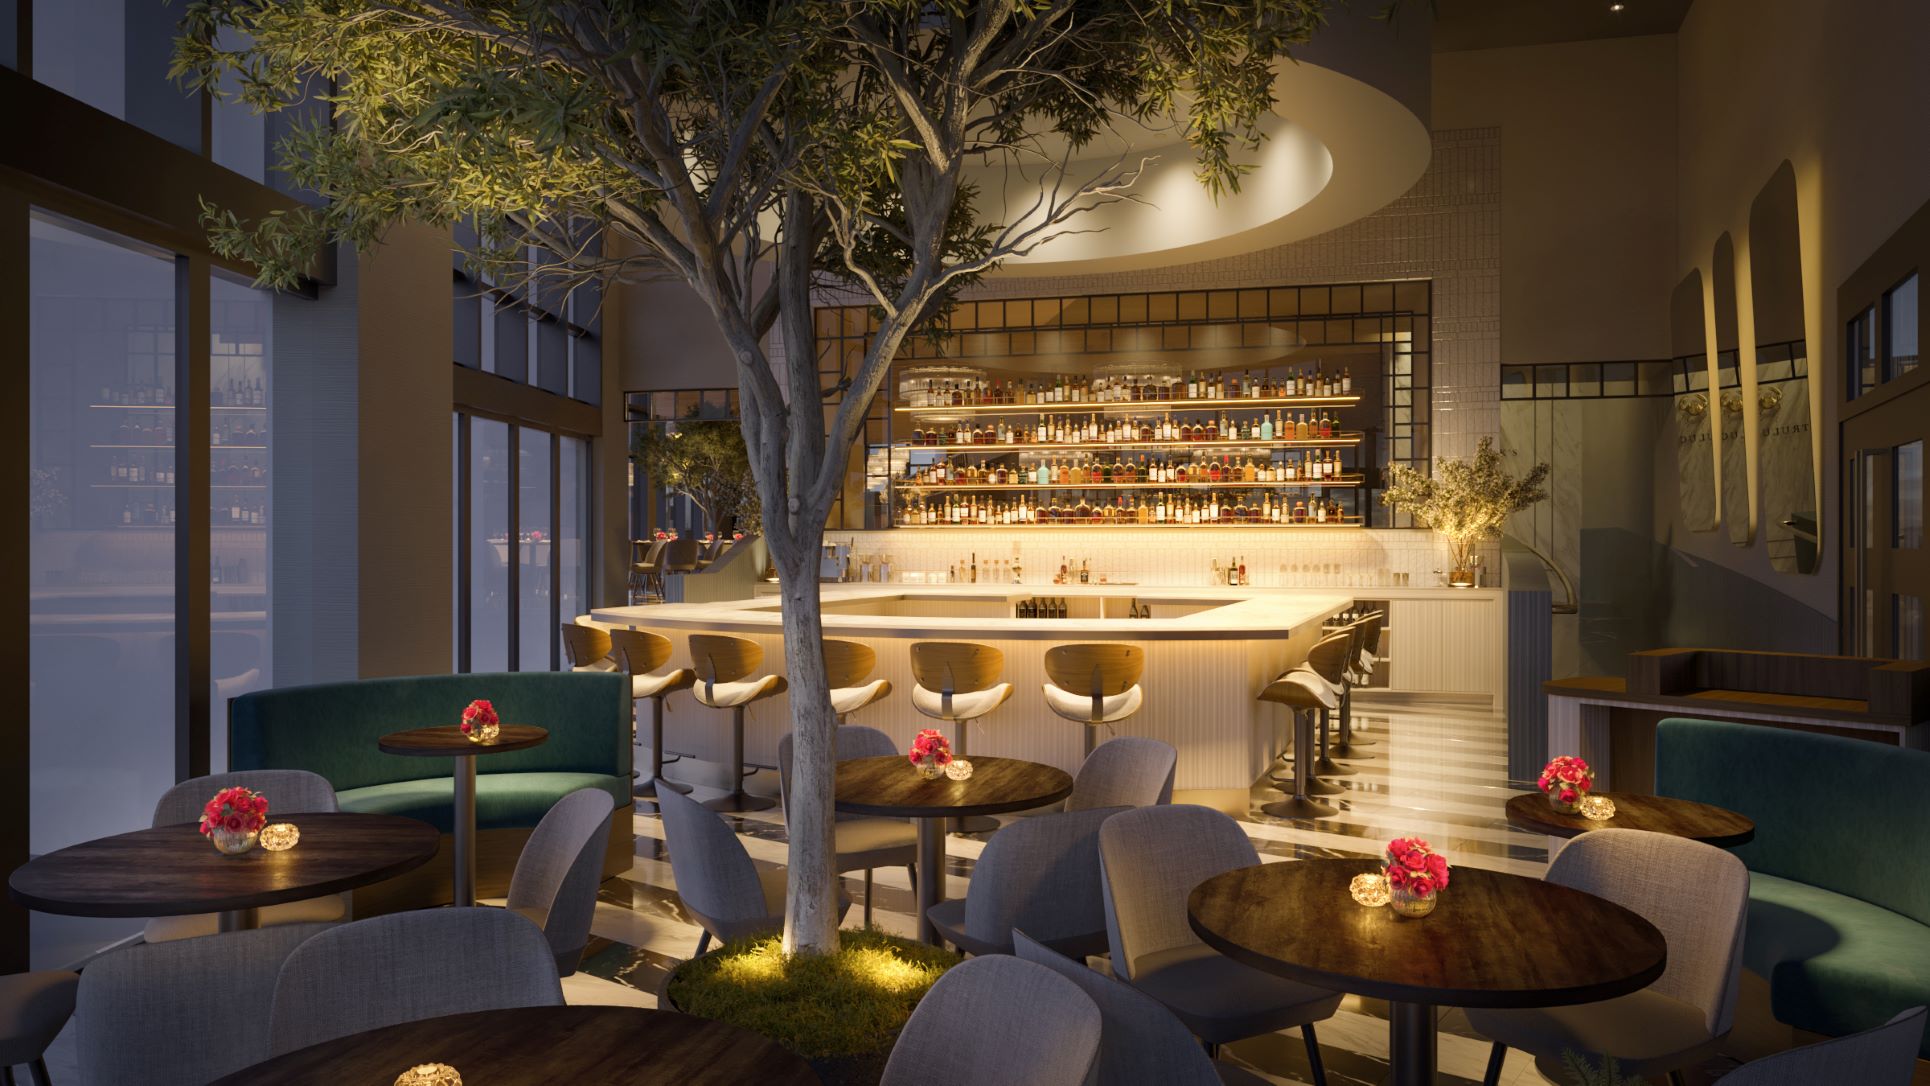 rendering of the Fort Lauderdale bar with a large tree in he interior bar area